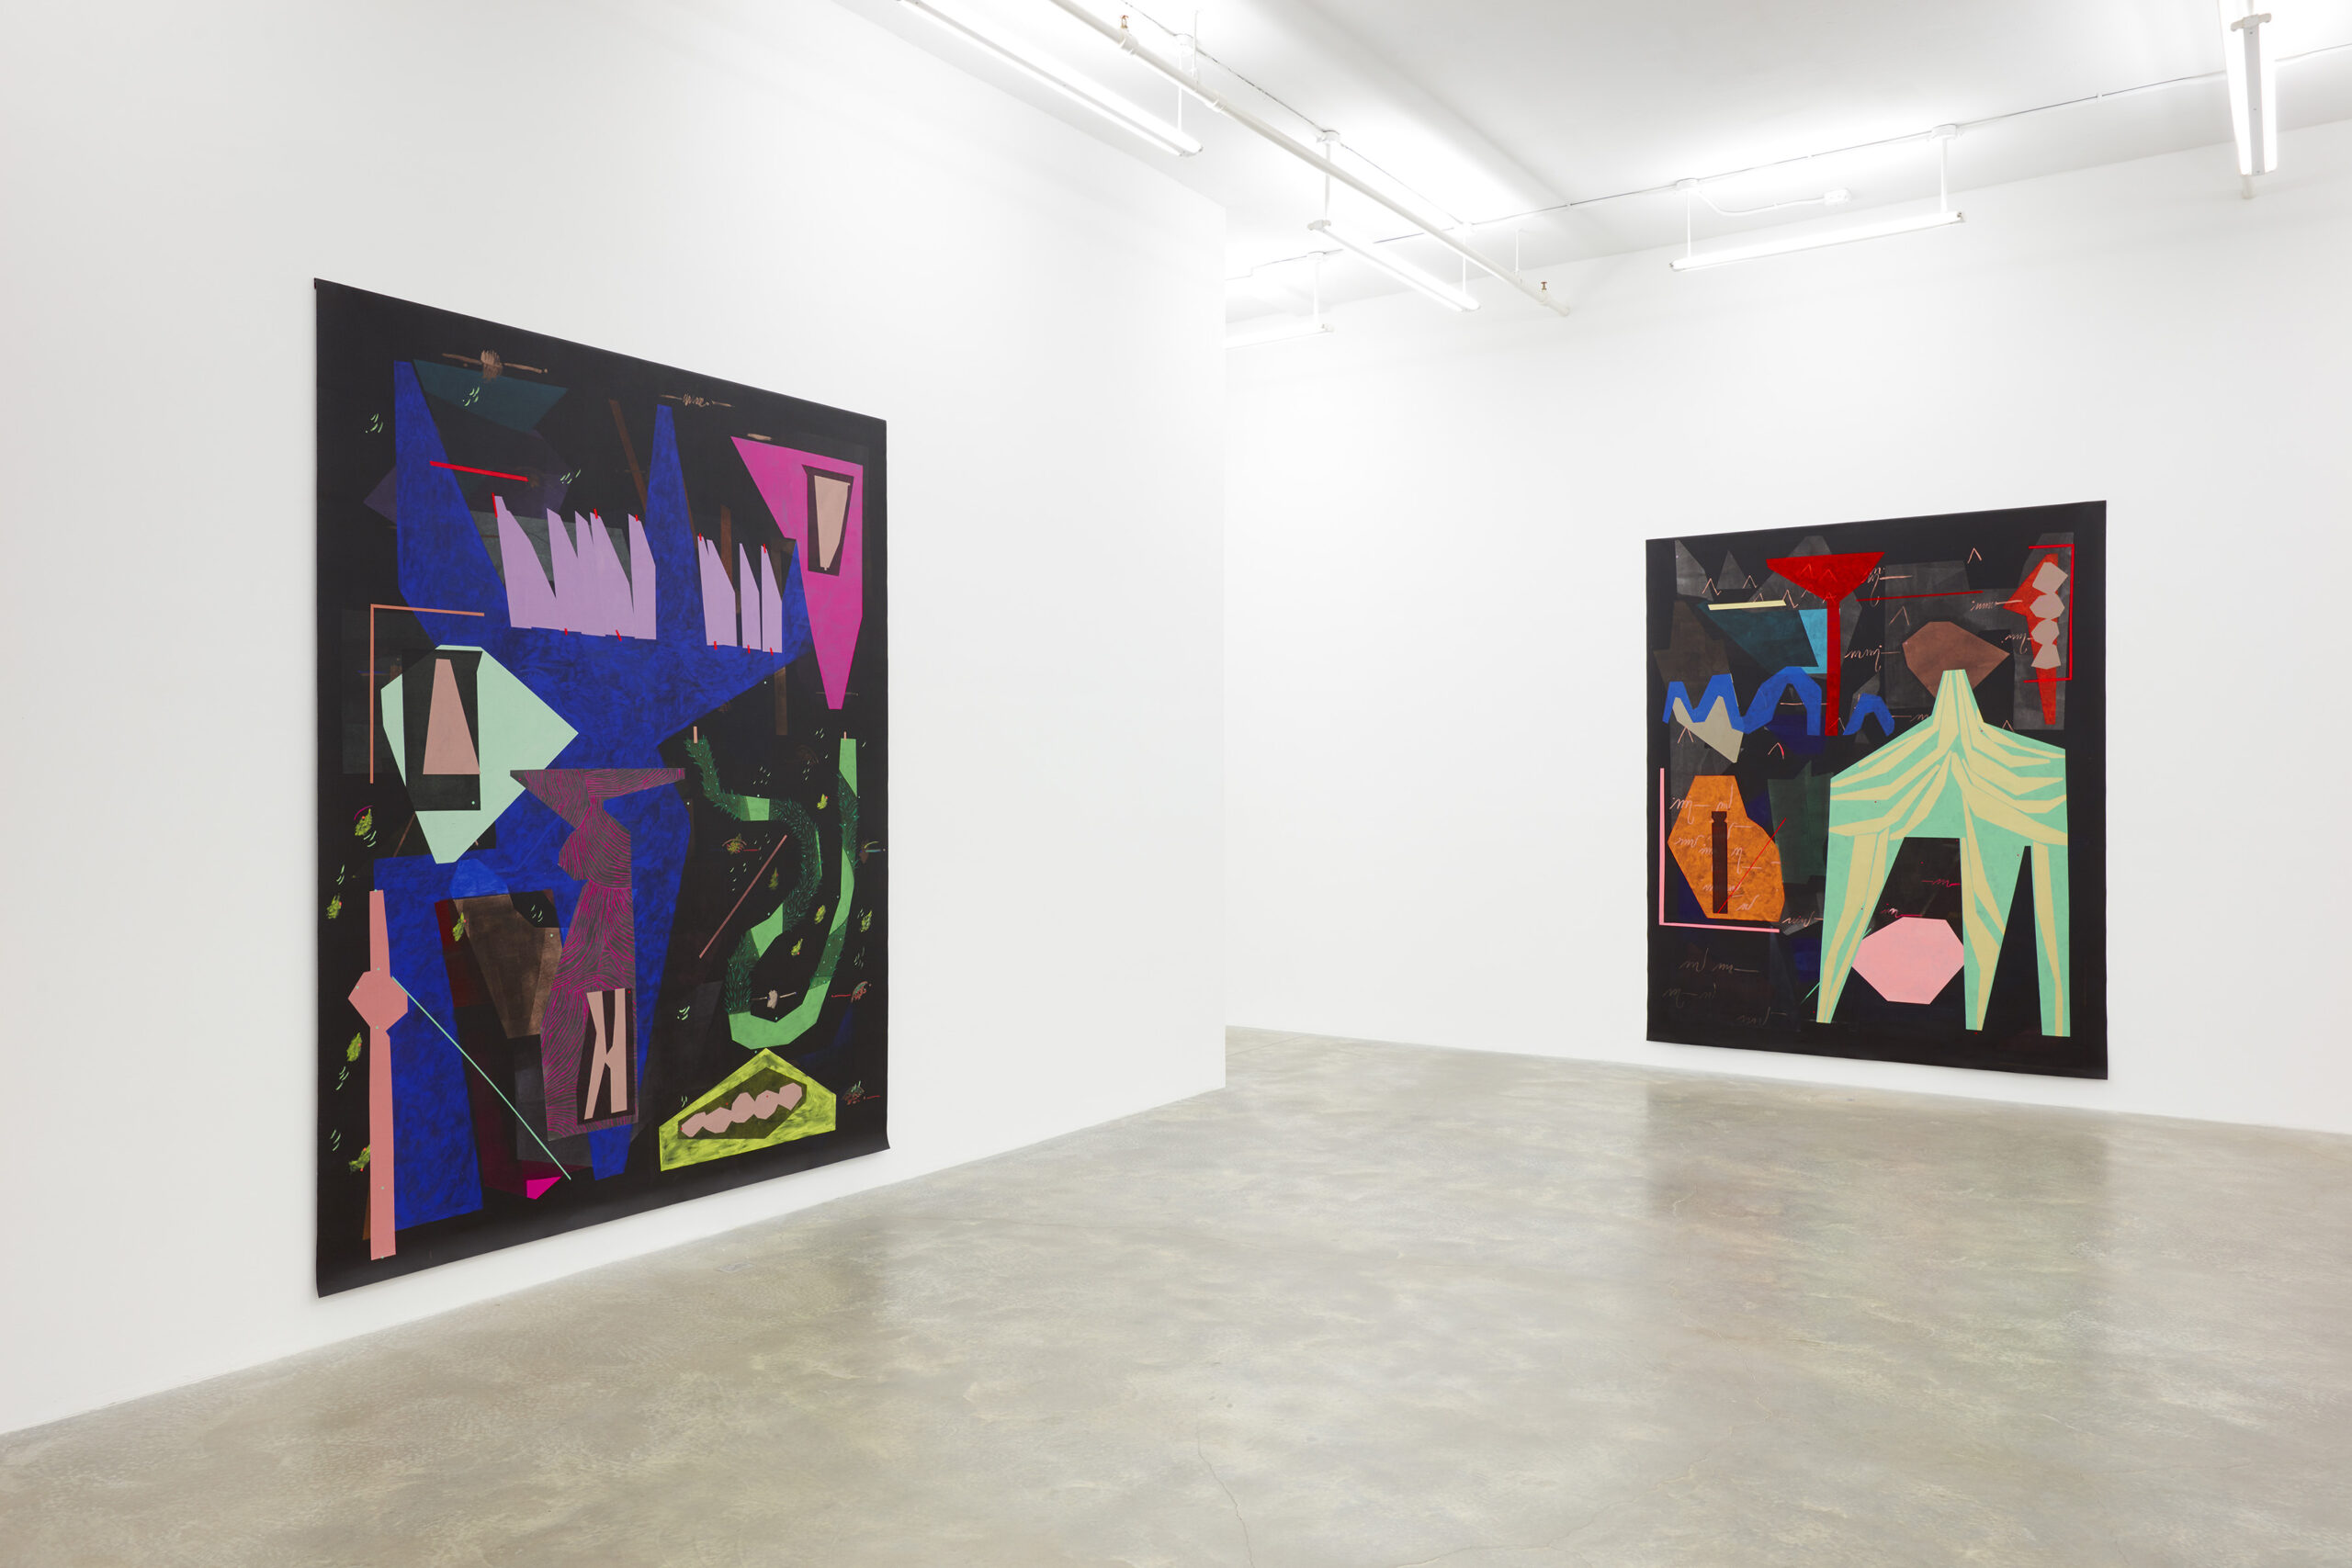 Large white-walled gallery with two large paintings hung on walls, with multicolored abstract shapes on black background.